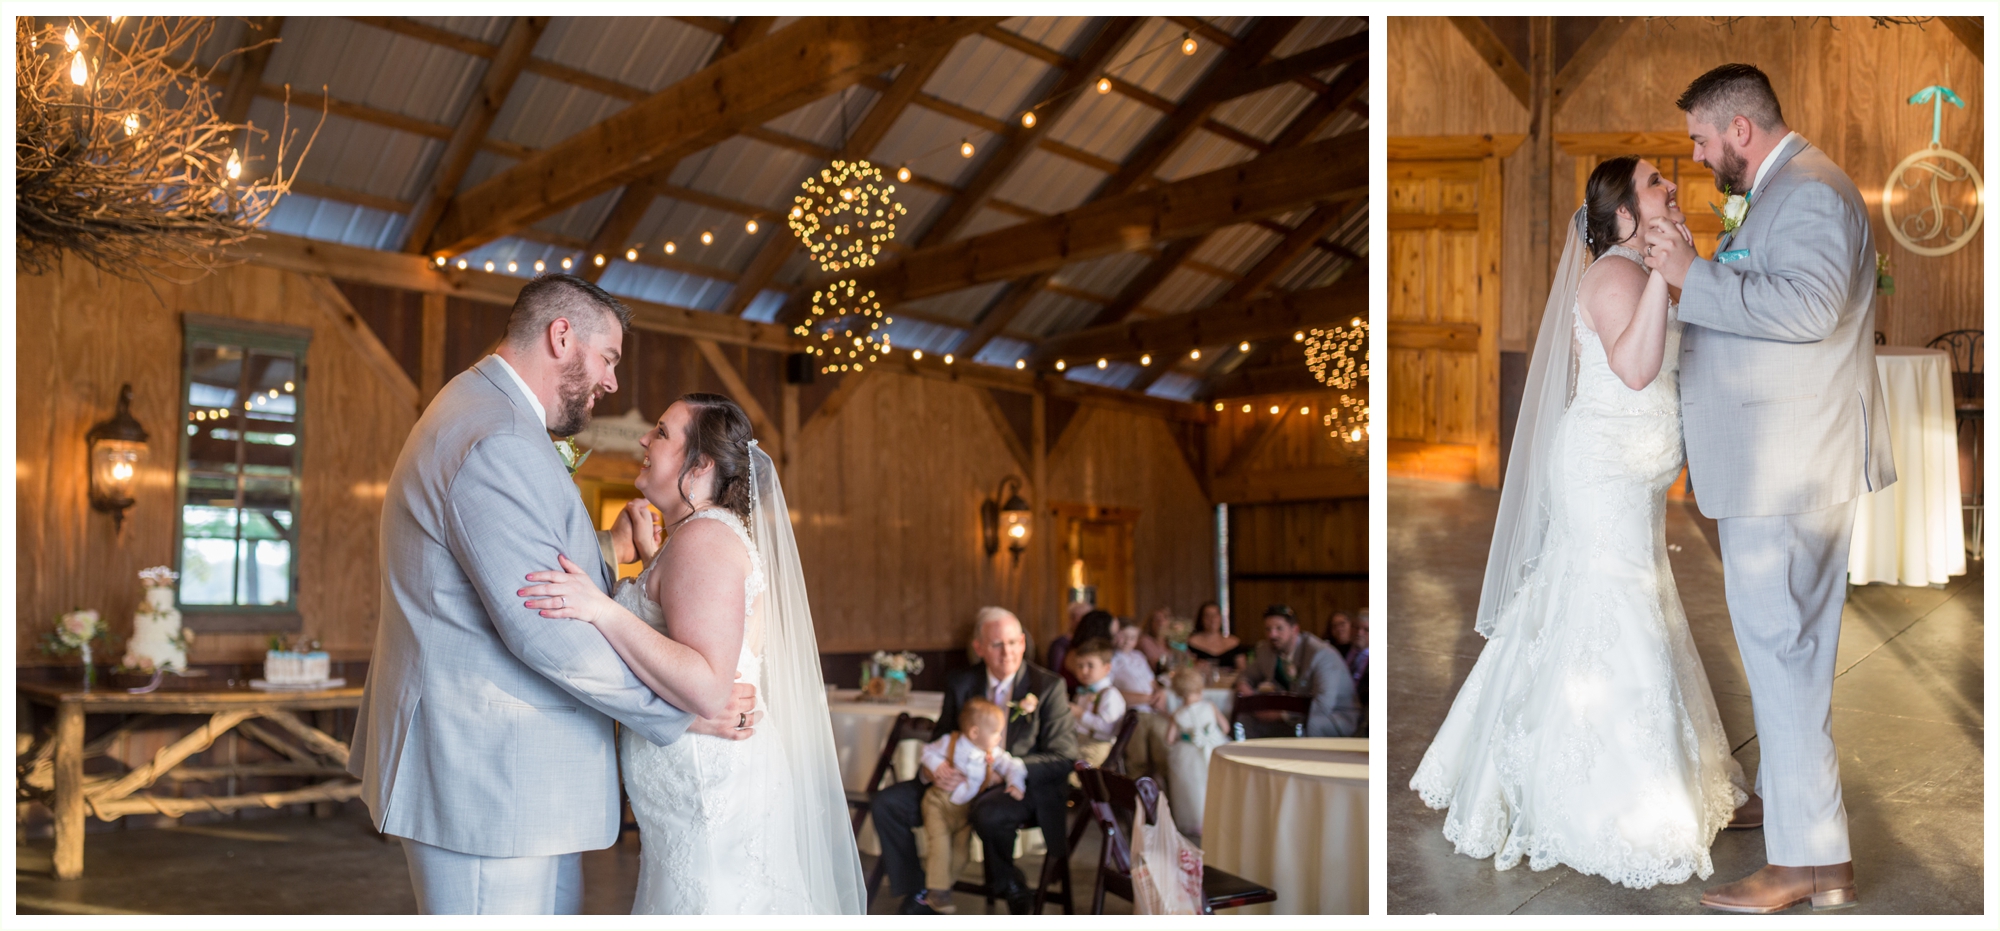 bride and groom share first dance in barn